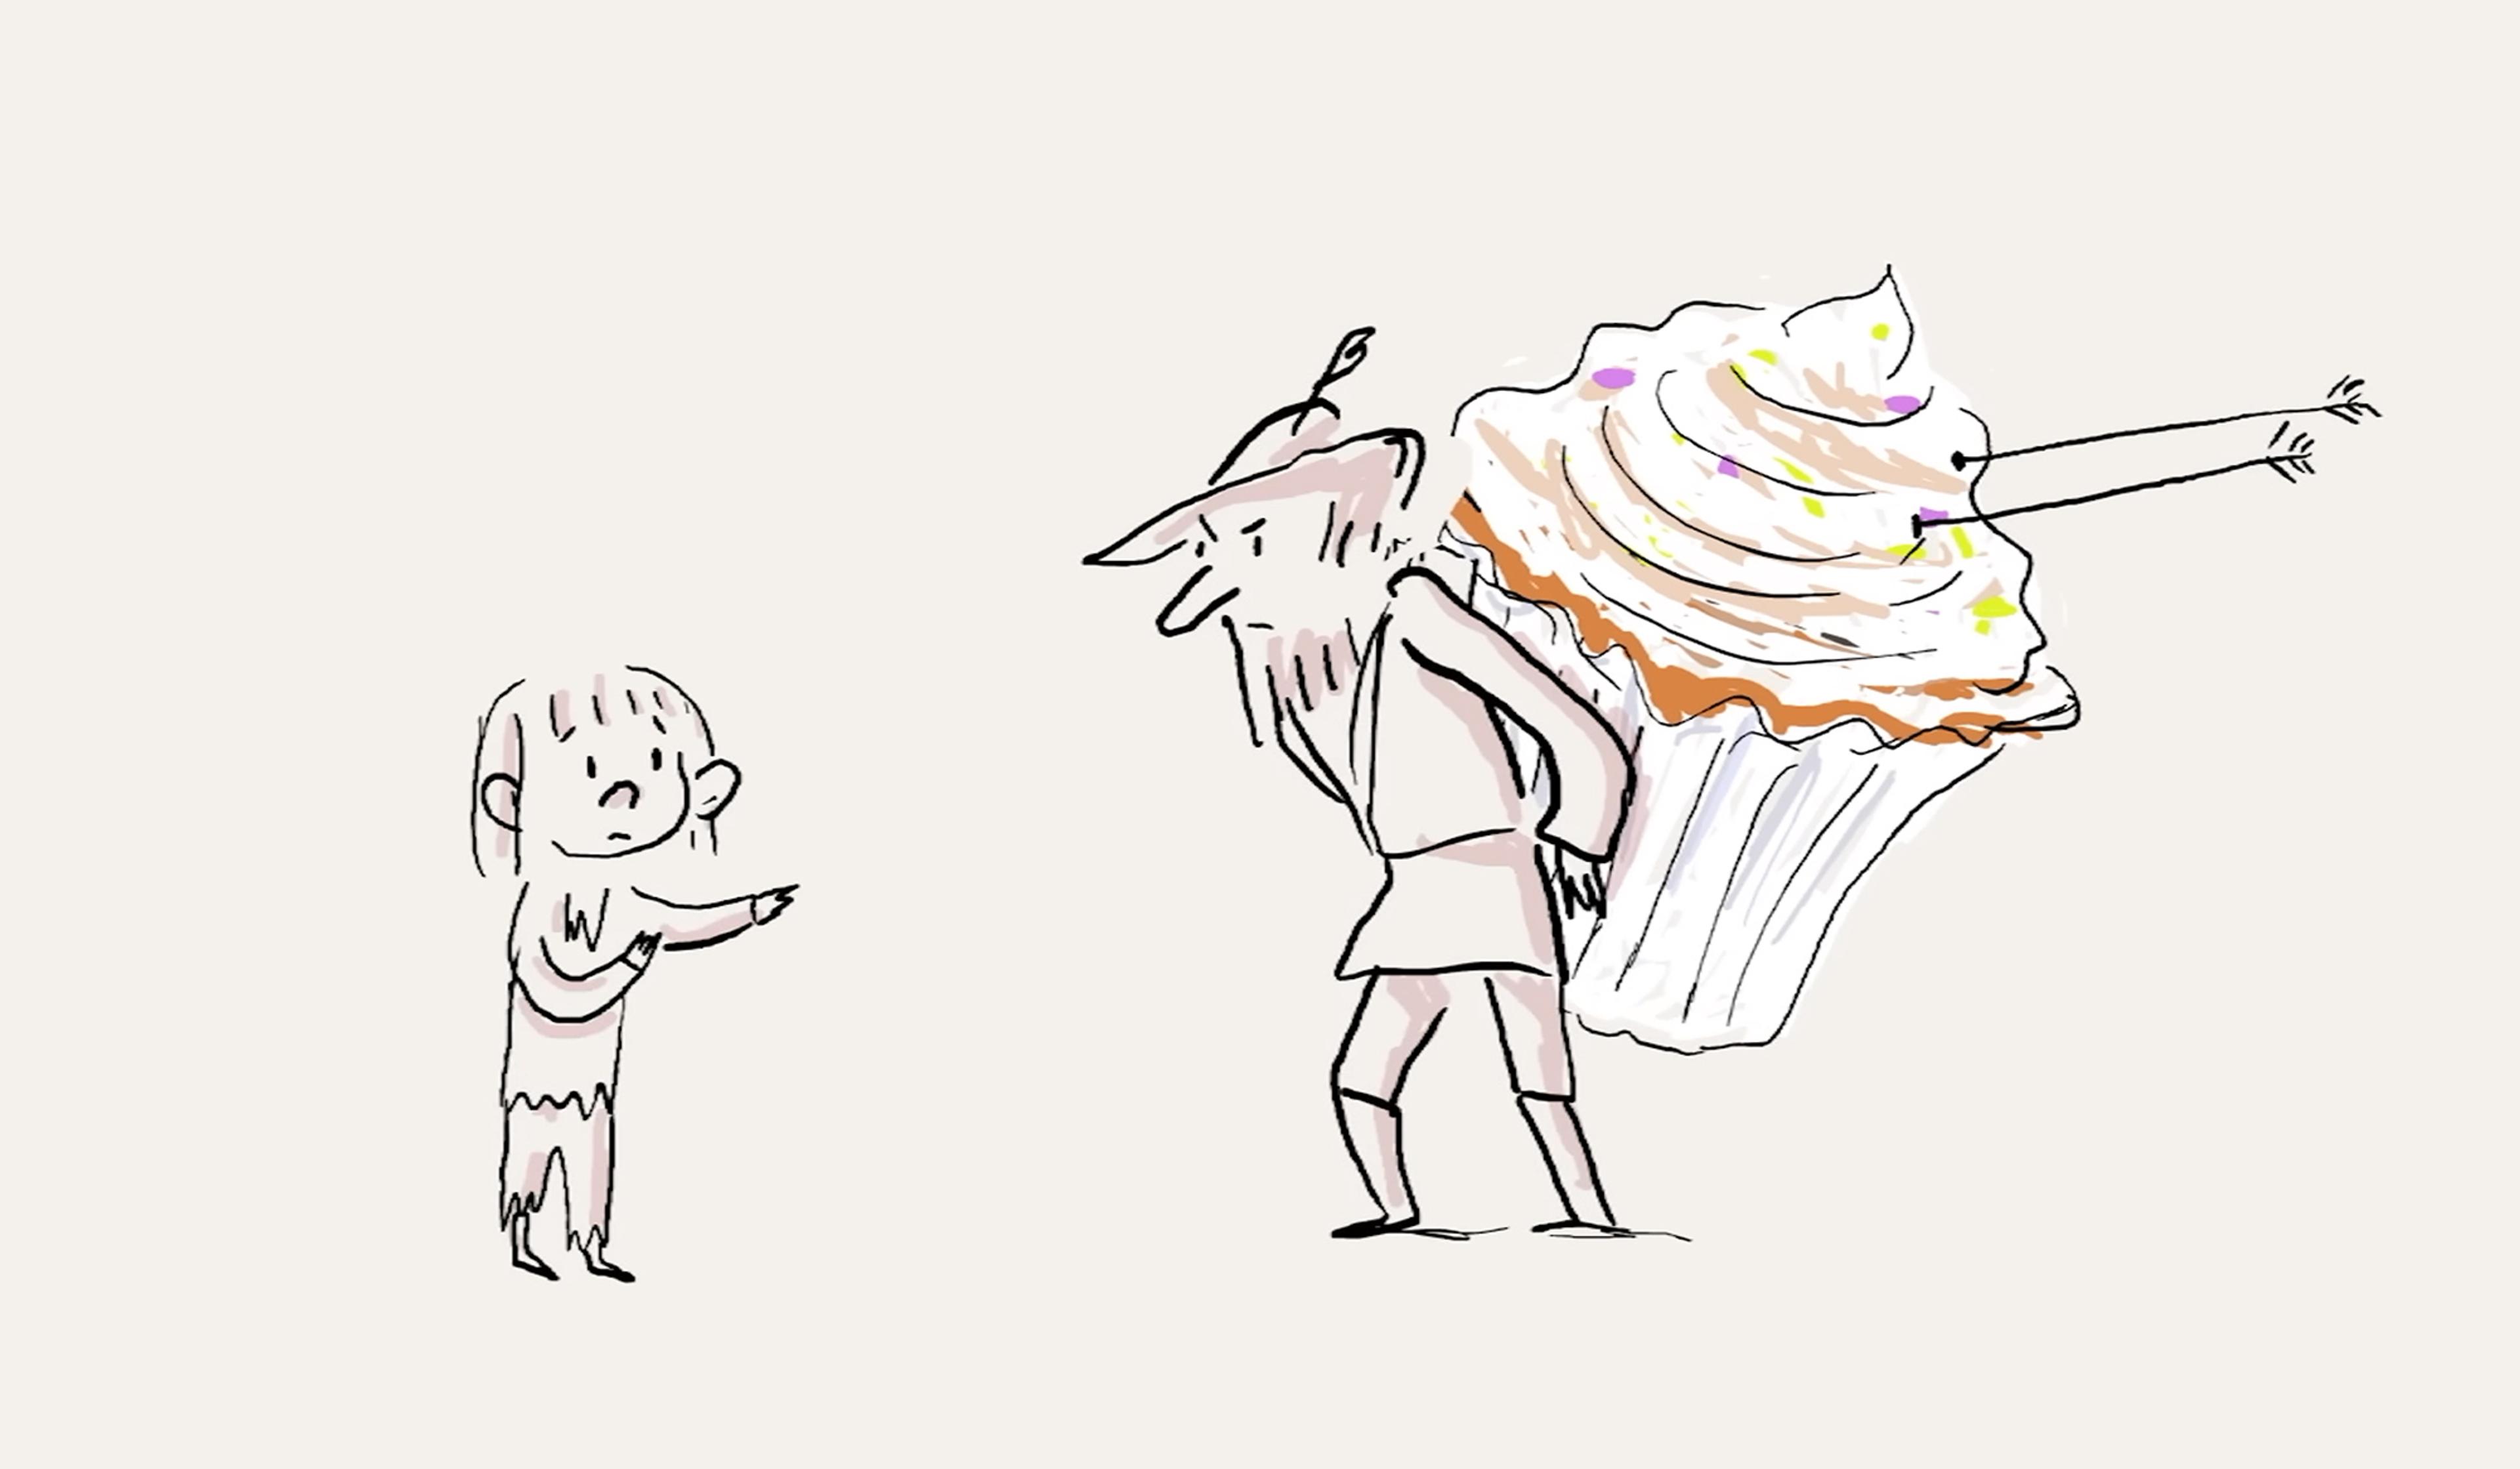 Drawing of a child pointing at a person carrying a giant cupcake, with an arm and hand emerging from the frosting.